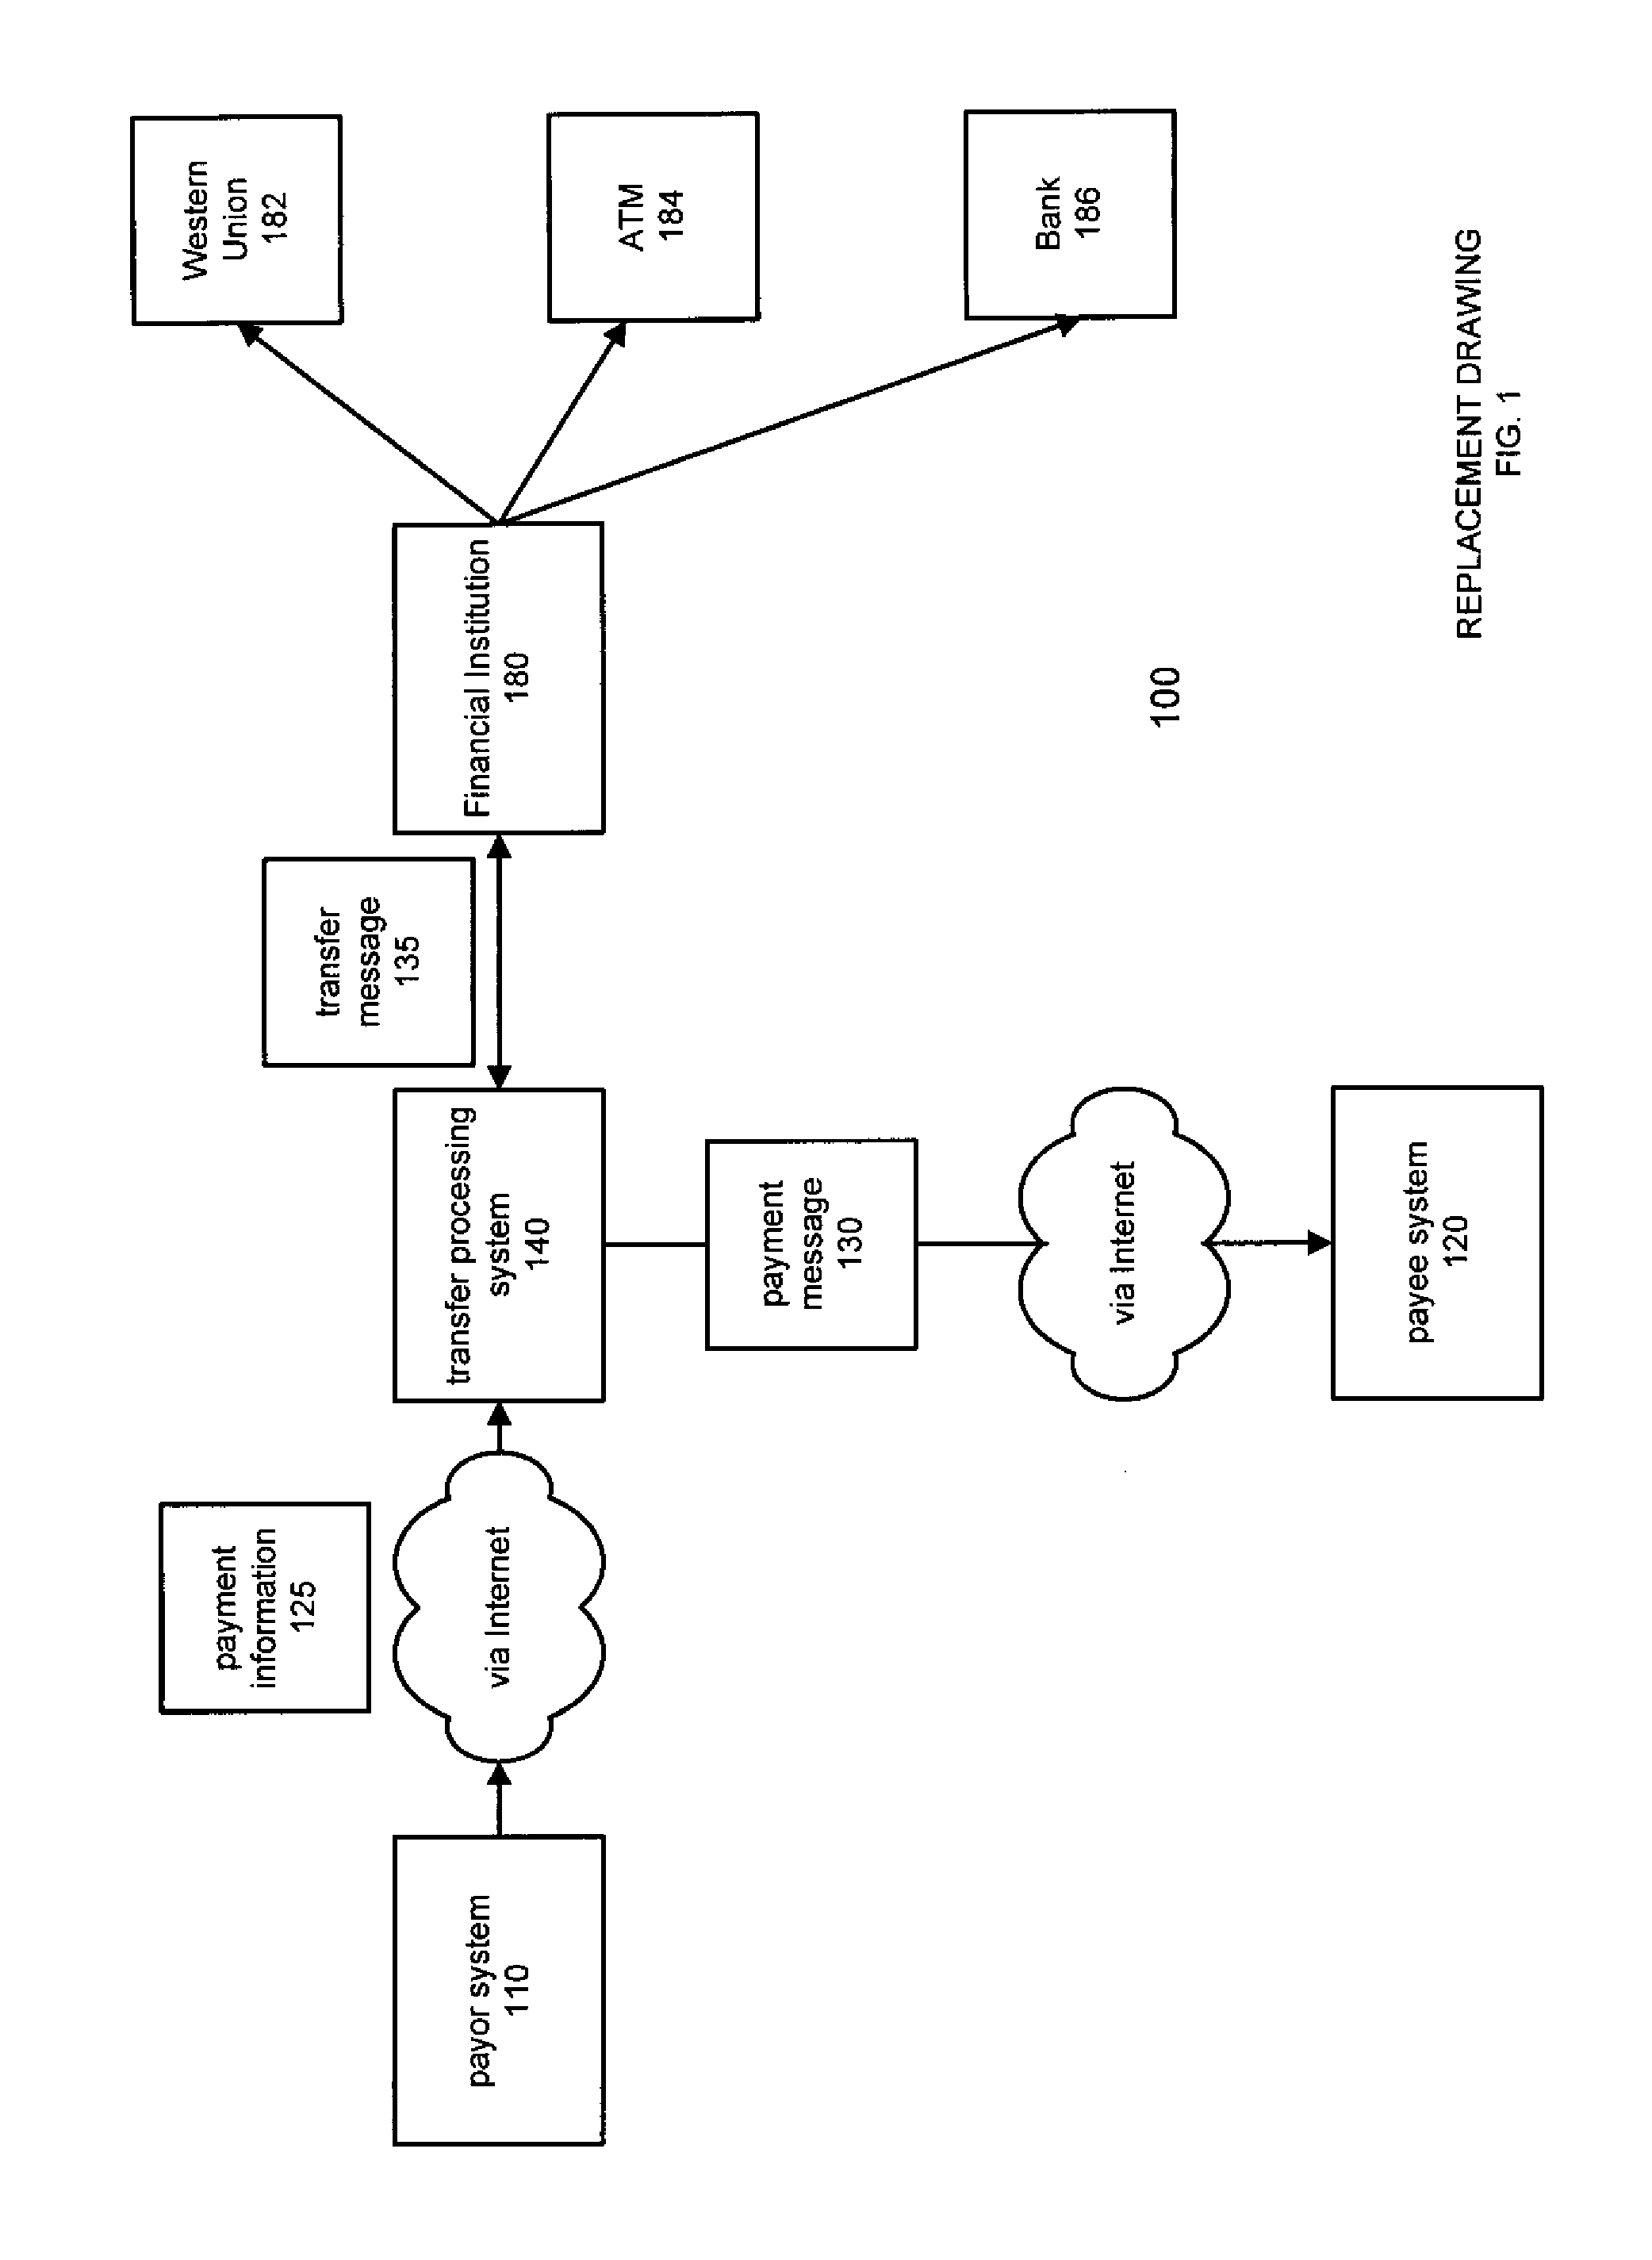 Method and system for transferring electronic funds